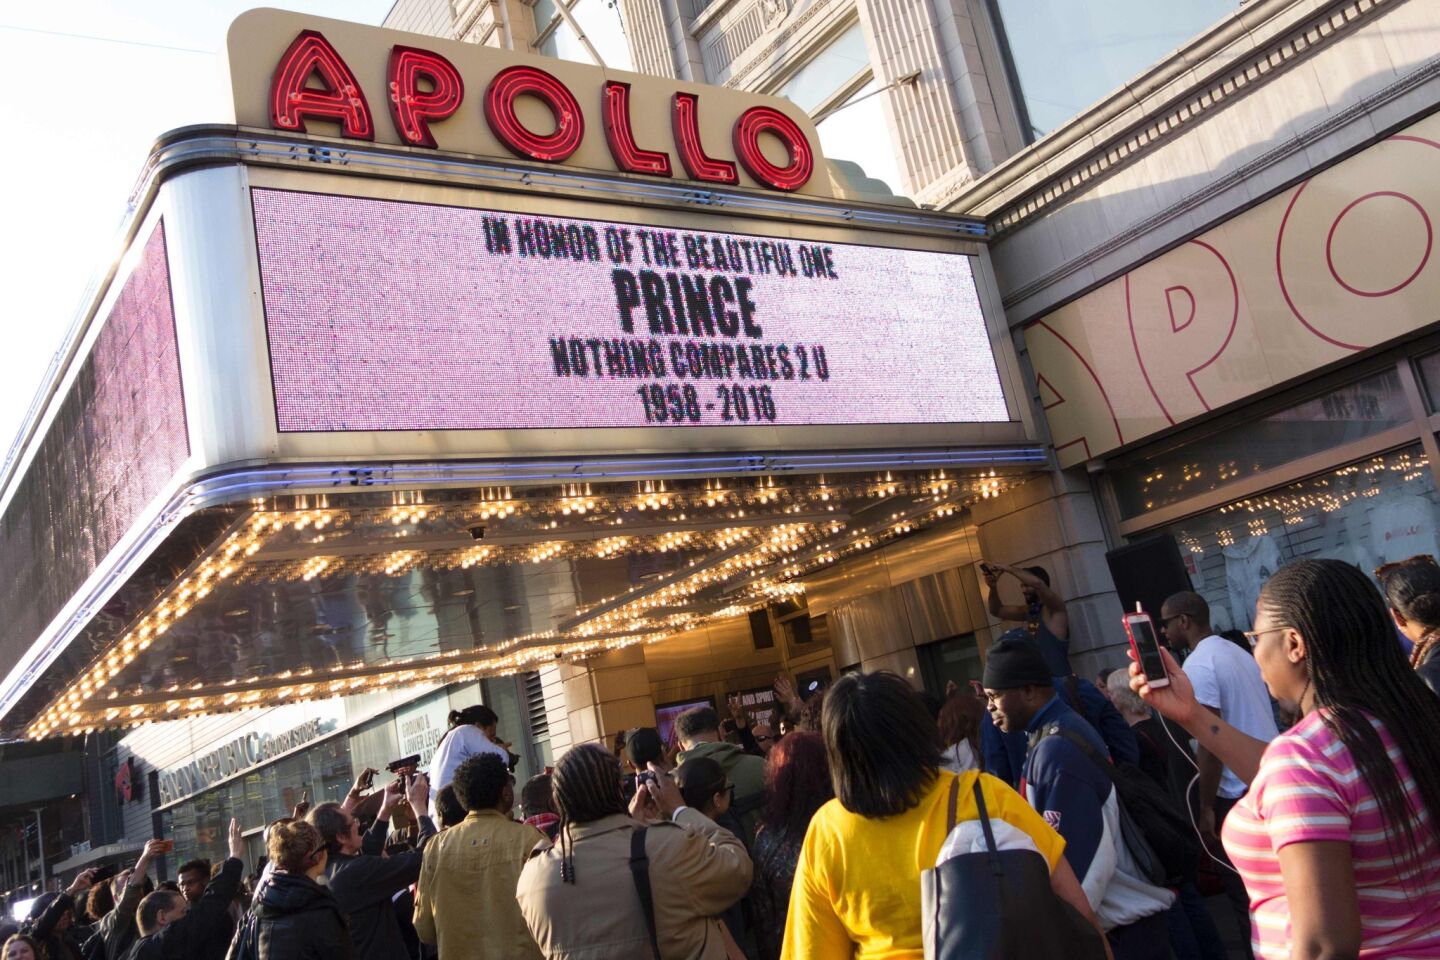 People gather outside the Apollo Theater in New York.